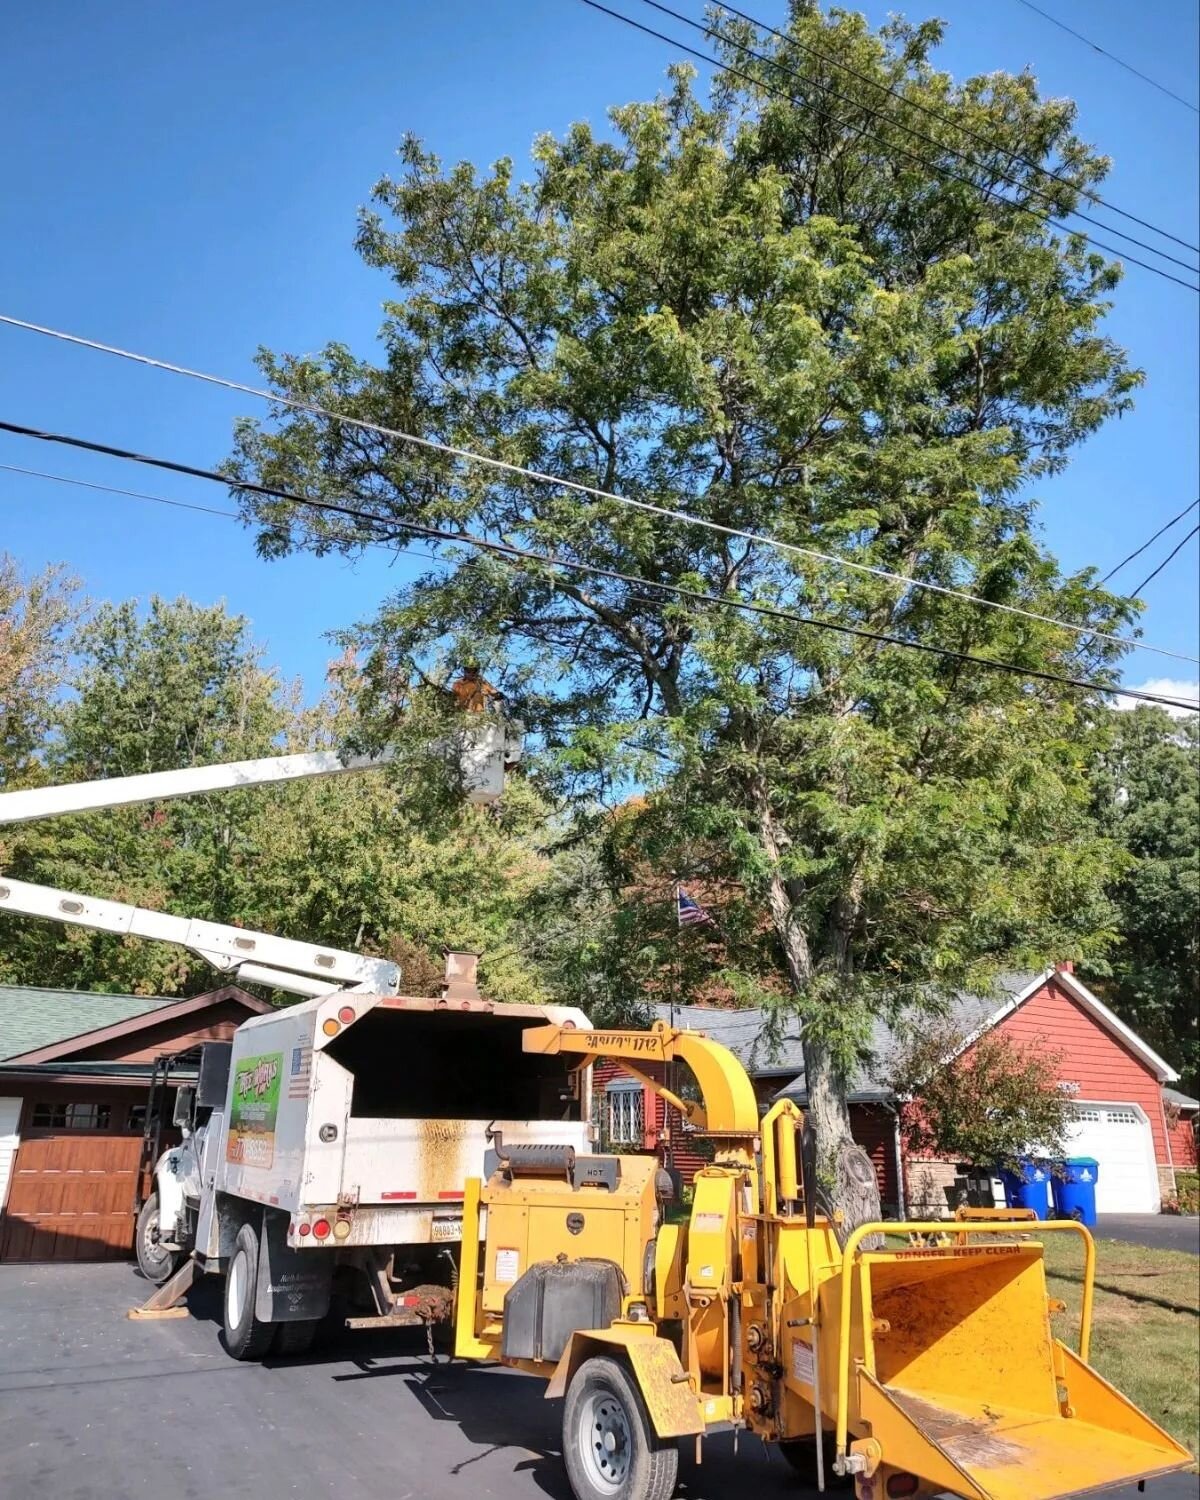 Removed a Locus 🌳 in-between power lines today 🪚

#locustree 
#powerlines 
#treework 
#stumpgrinding 
#cleanup